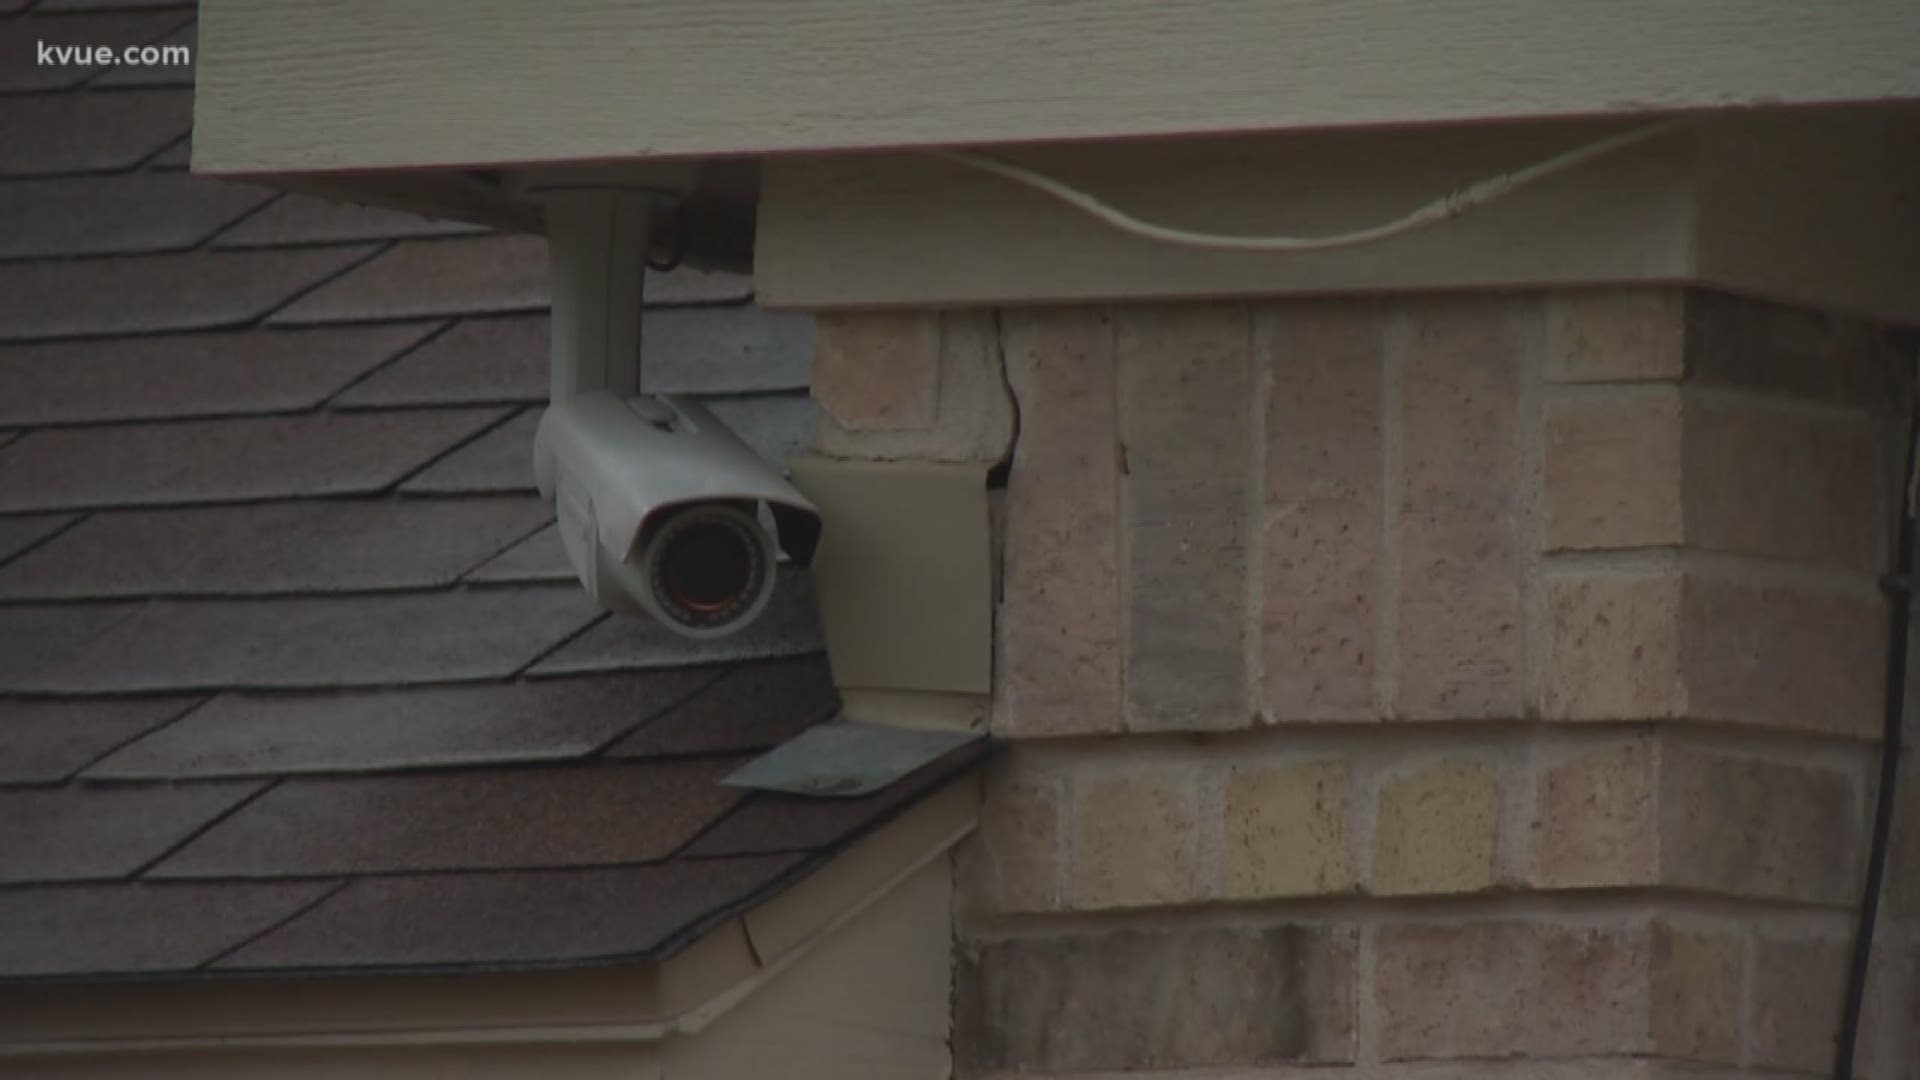 Police in Pflugerville want residents with cameras outside their homes to register them, and let police use them if someone commits a crime in the area